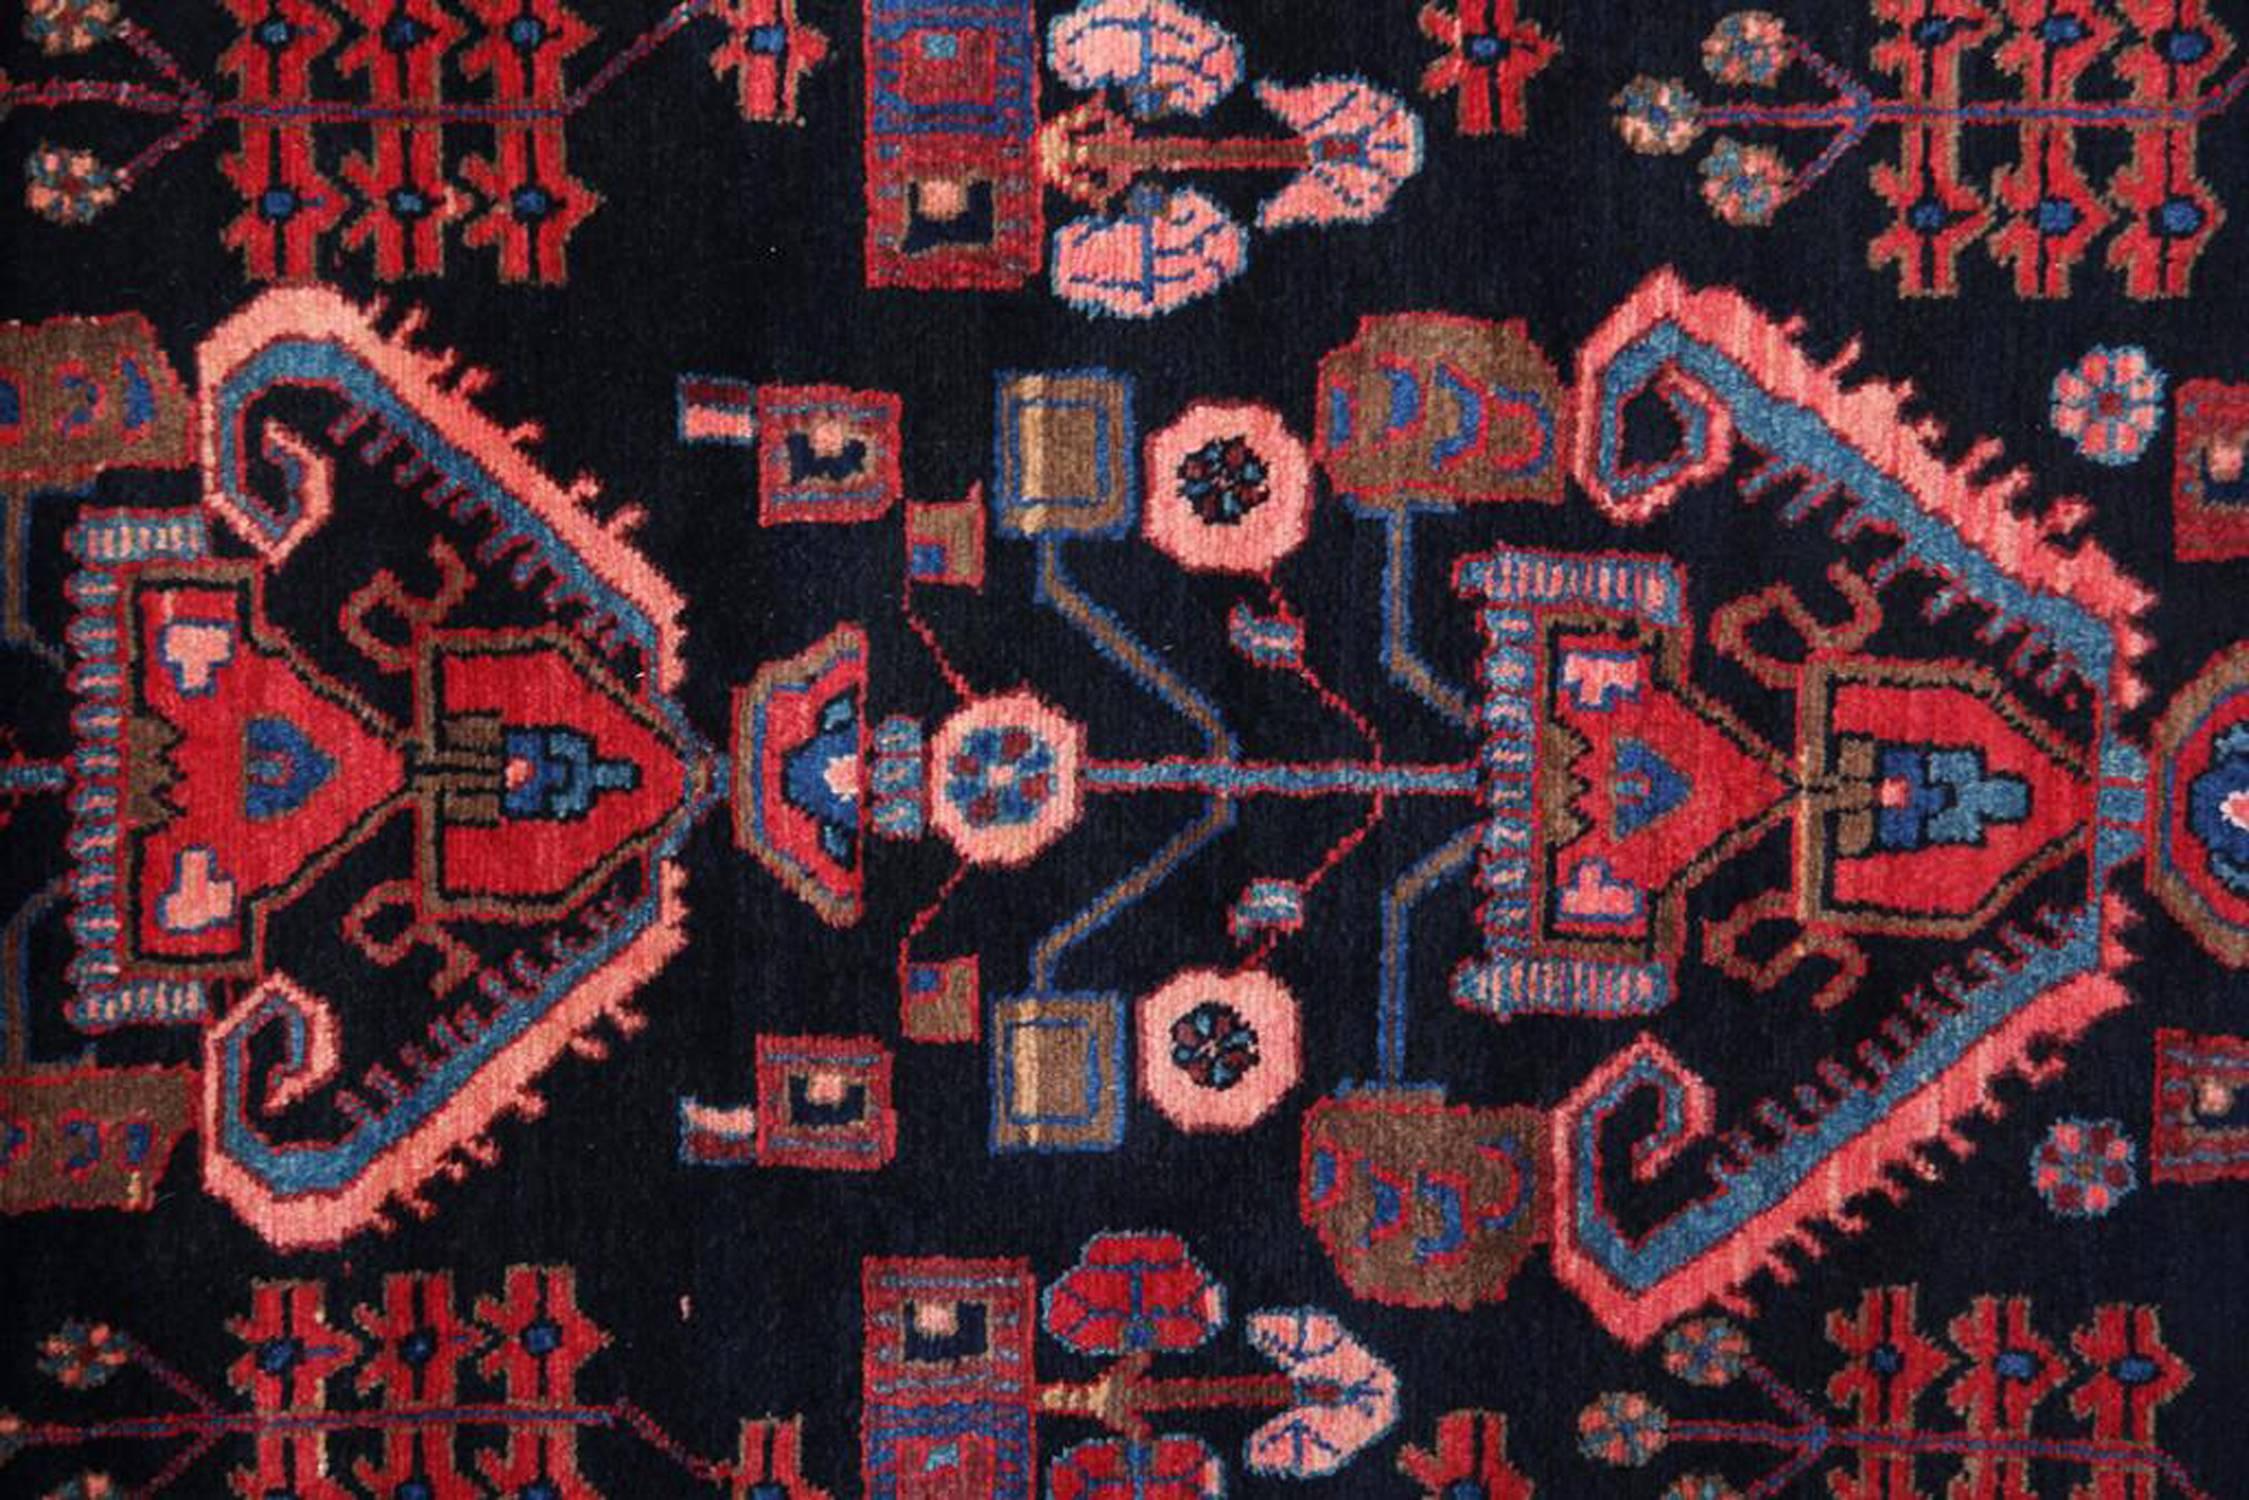 This elegant wool rug was woven by hand in the 1950s with a fantastic geometric repeat pattern design. The central pattern has been woven on a dark background with contrasting red, blue and beige accents that make up the decorative tribal design. A